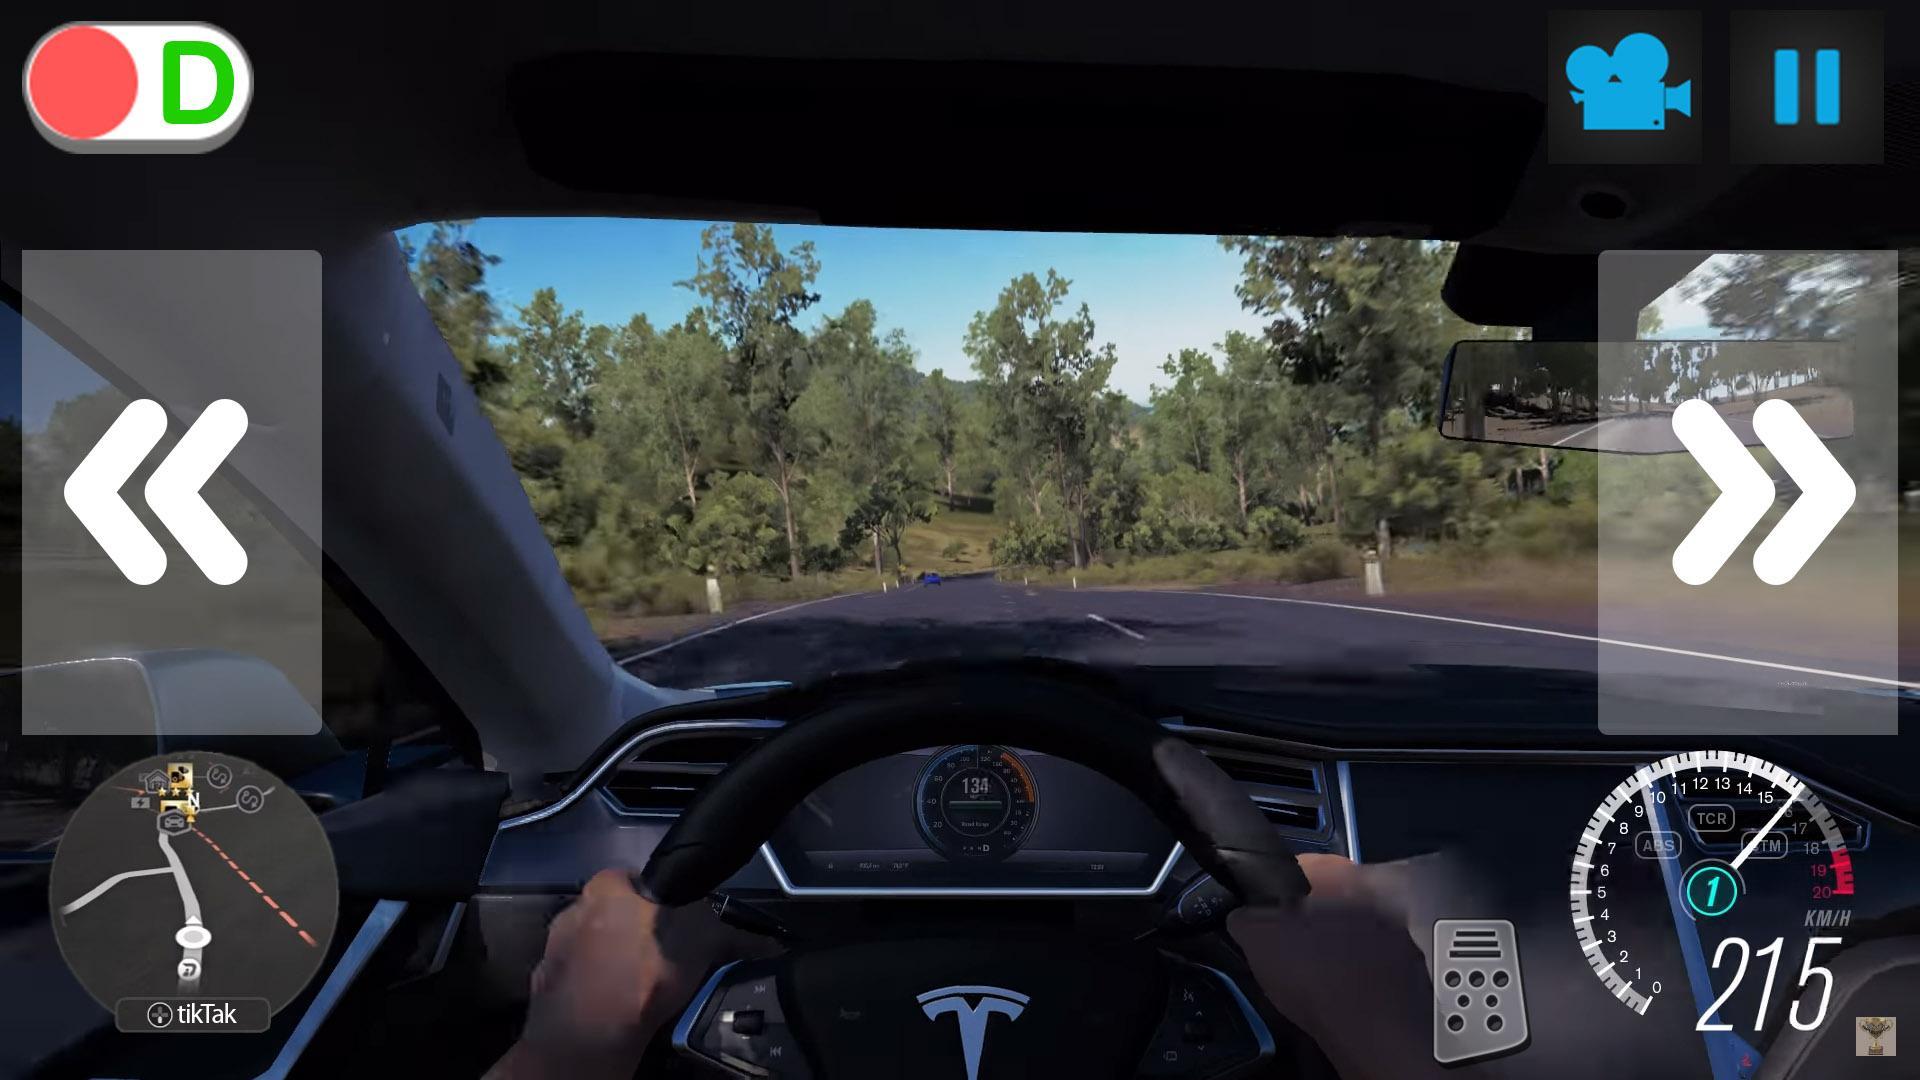 City Driver Tesla Model S Simulator For Android Apk Download